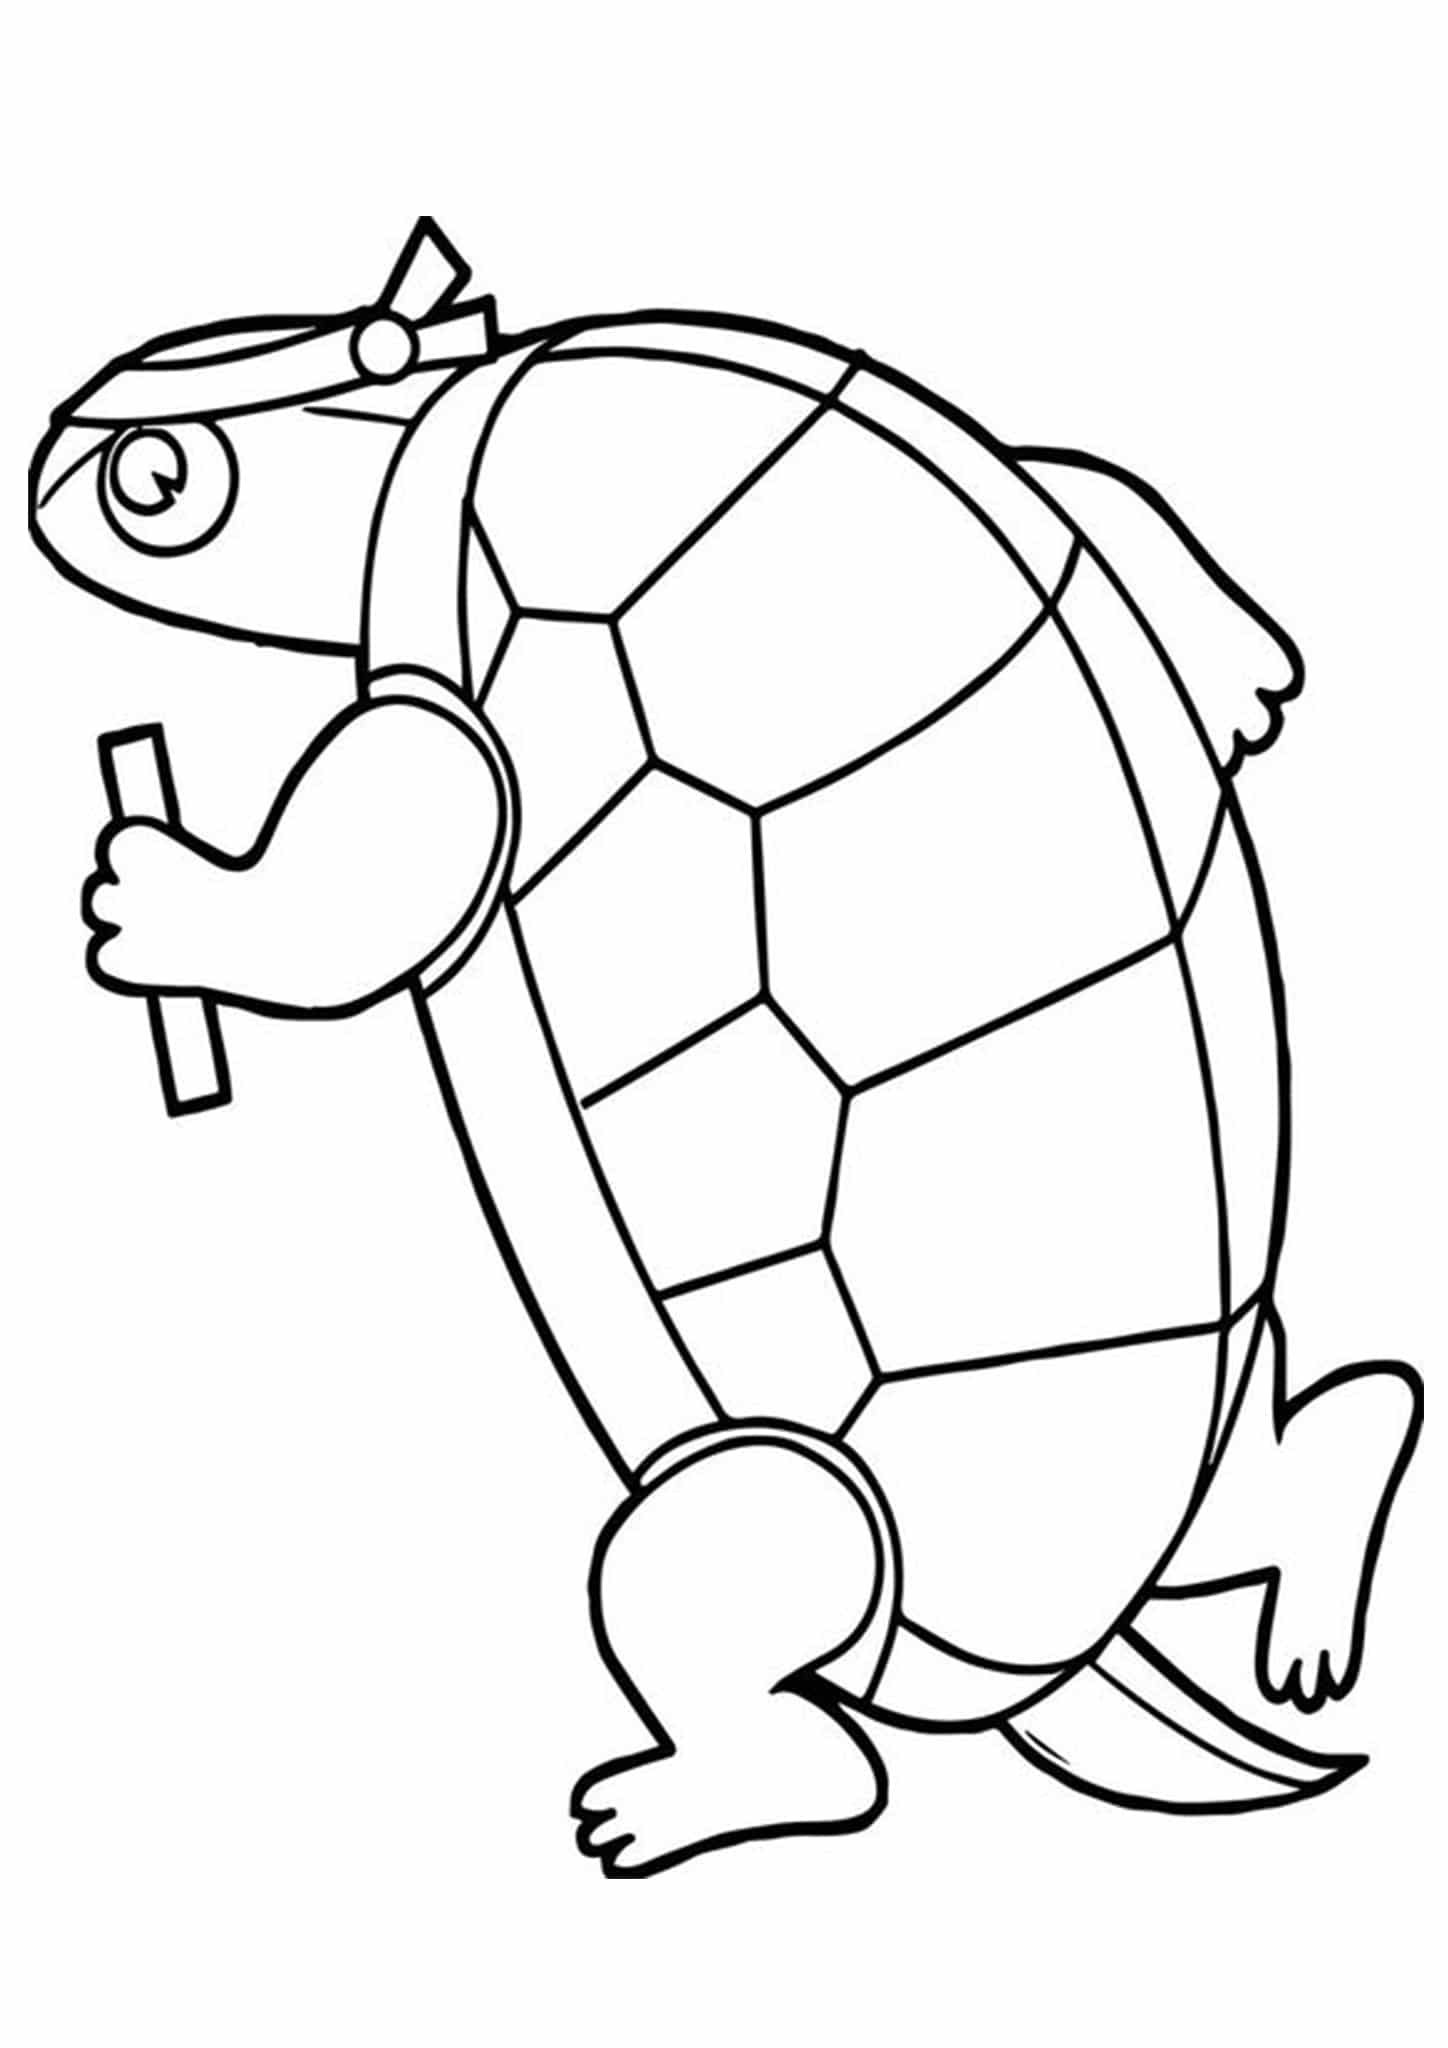 Download Free & Easy To Print Turtle Coloring Pages - Tulamama